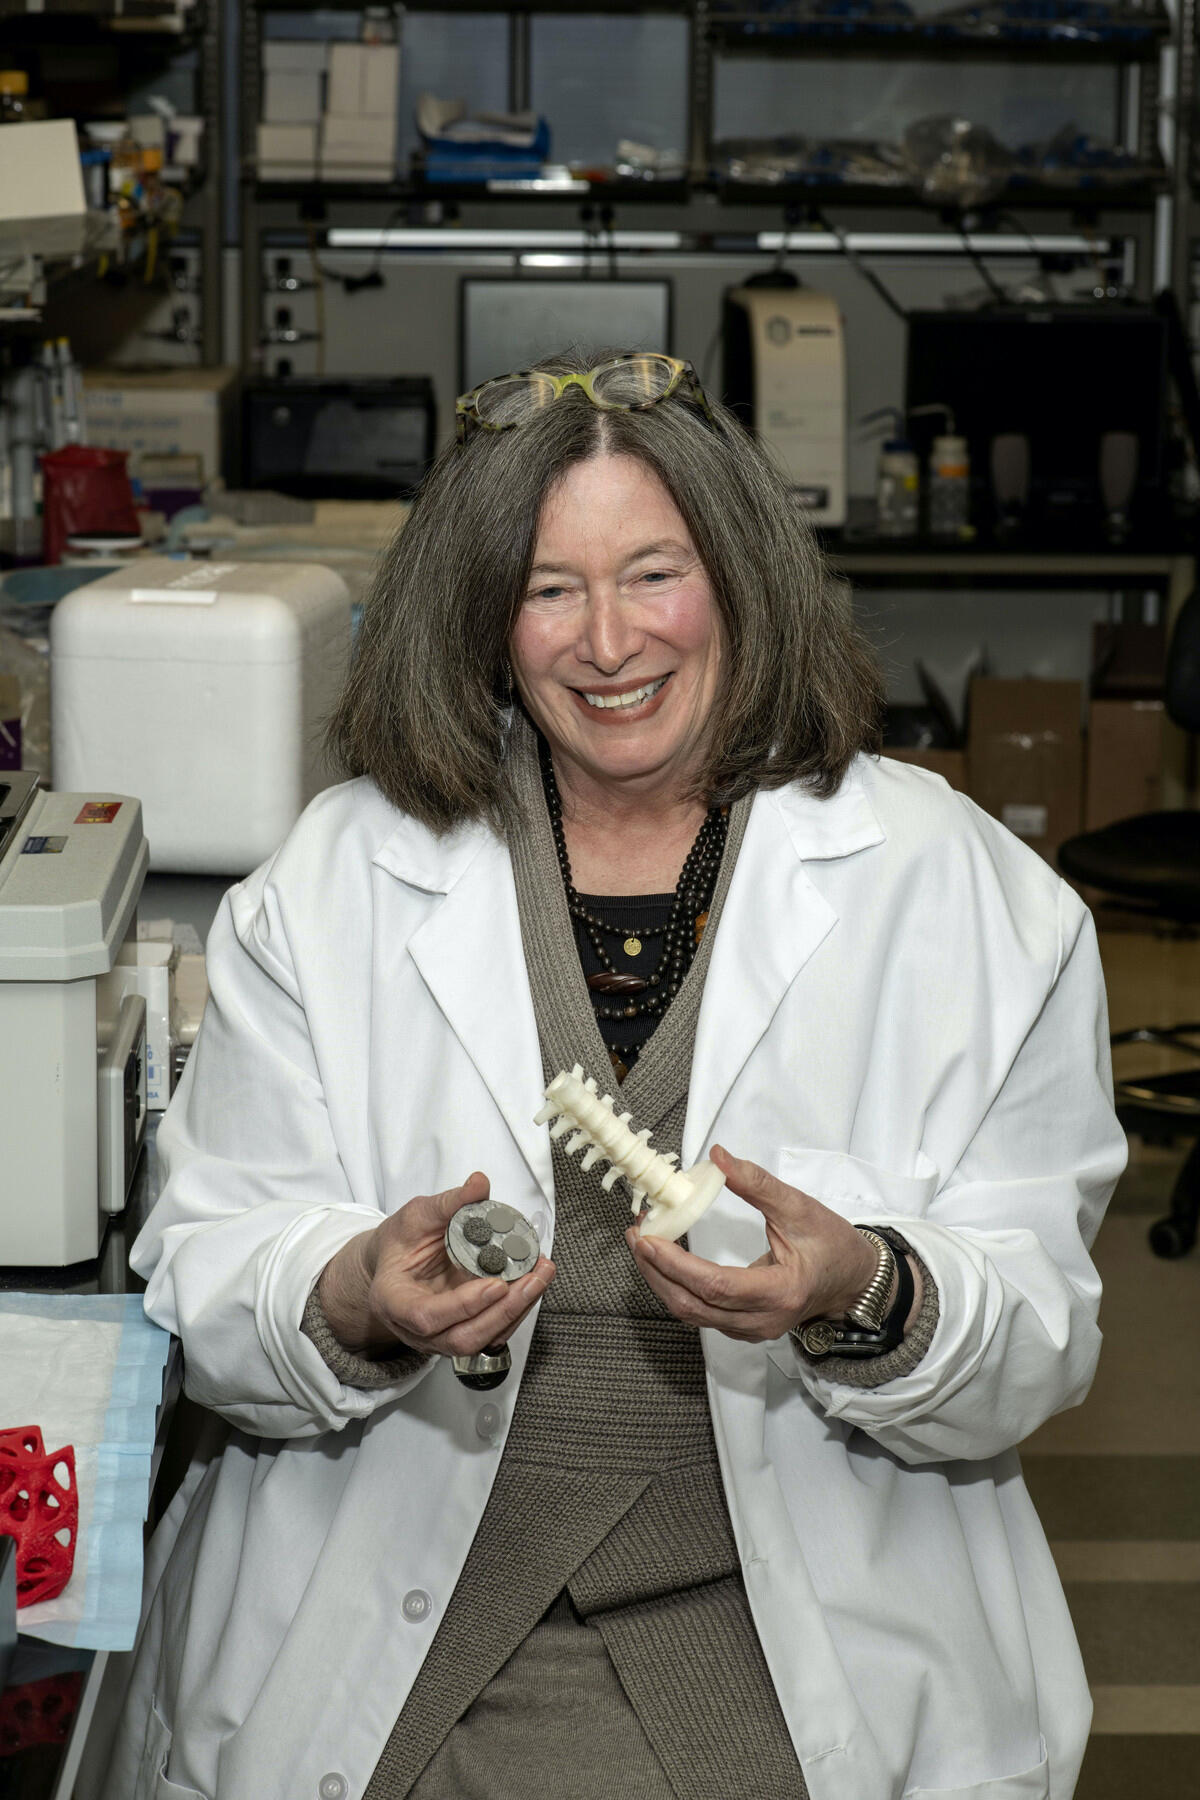 A woman wearing a lab coat and smiling while holding models of bones.